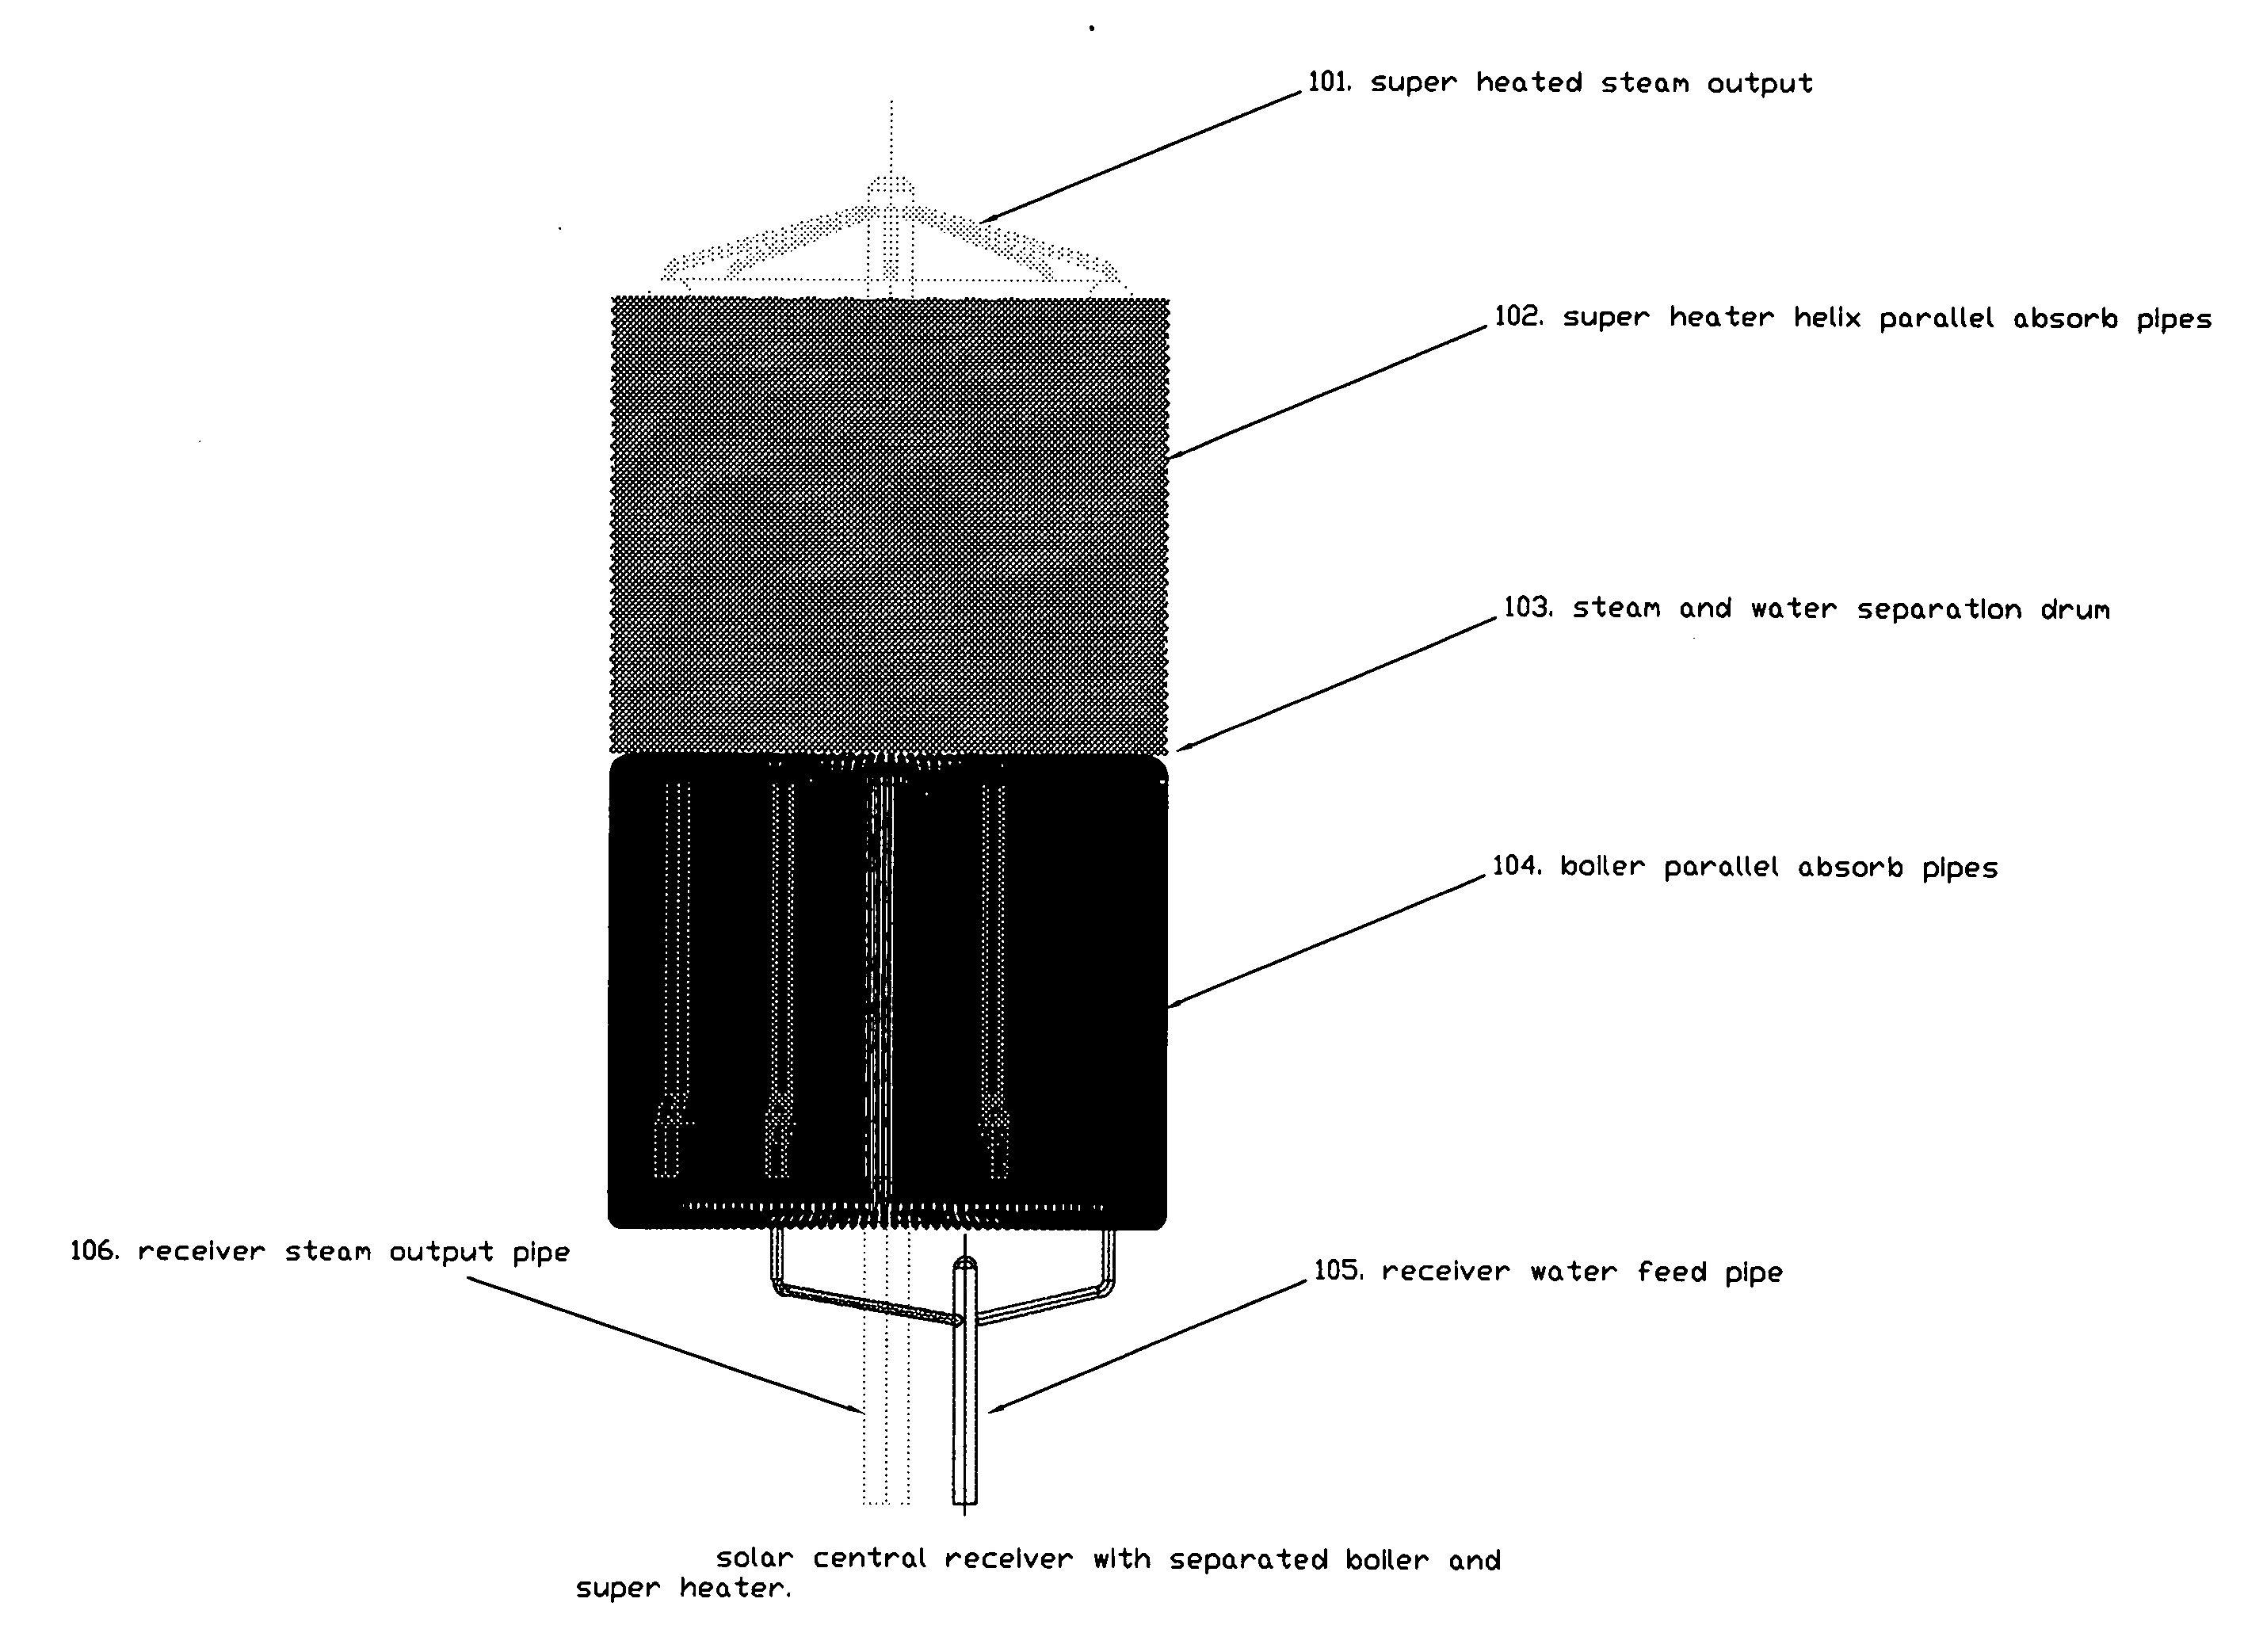 Method and apparatus of solar central receiver with boiler and super-heater